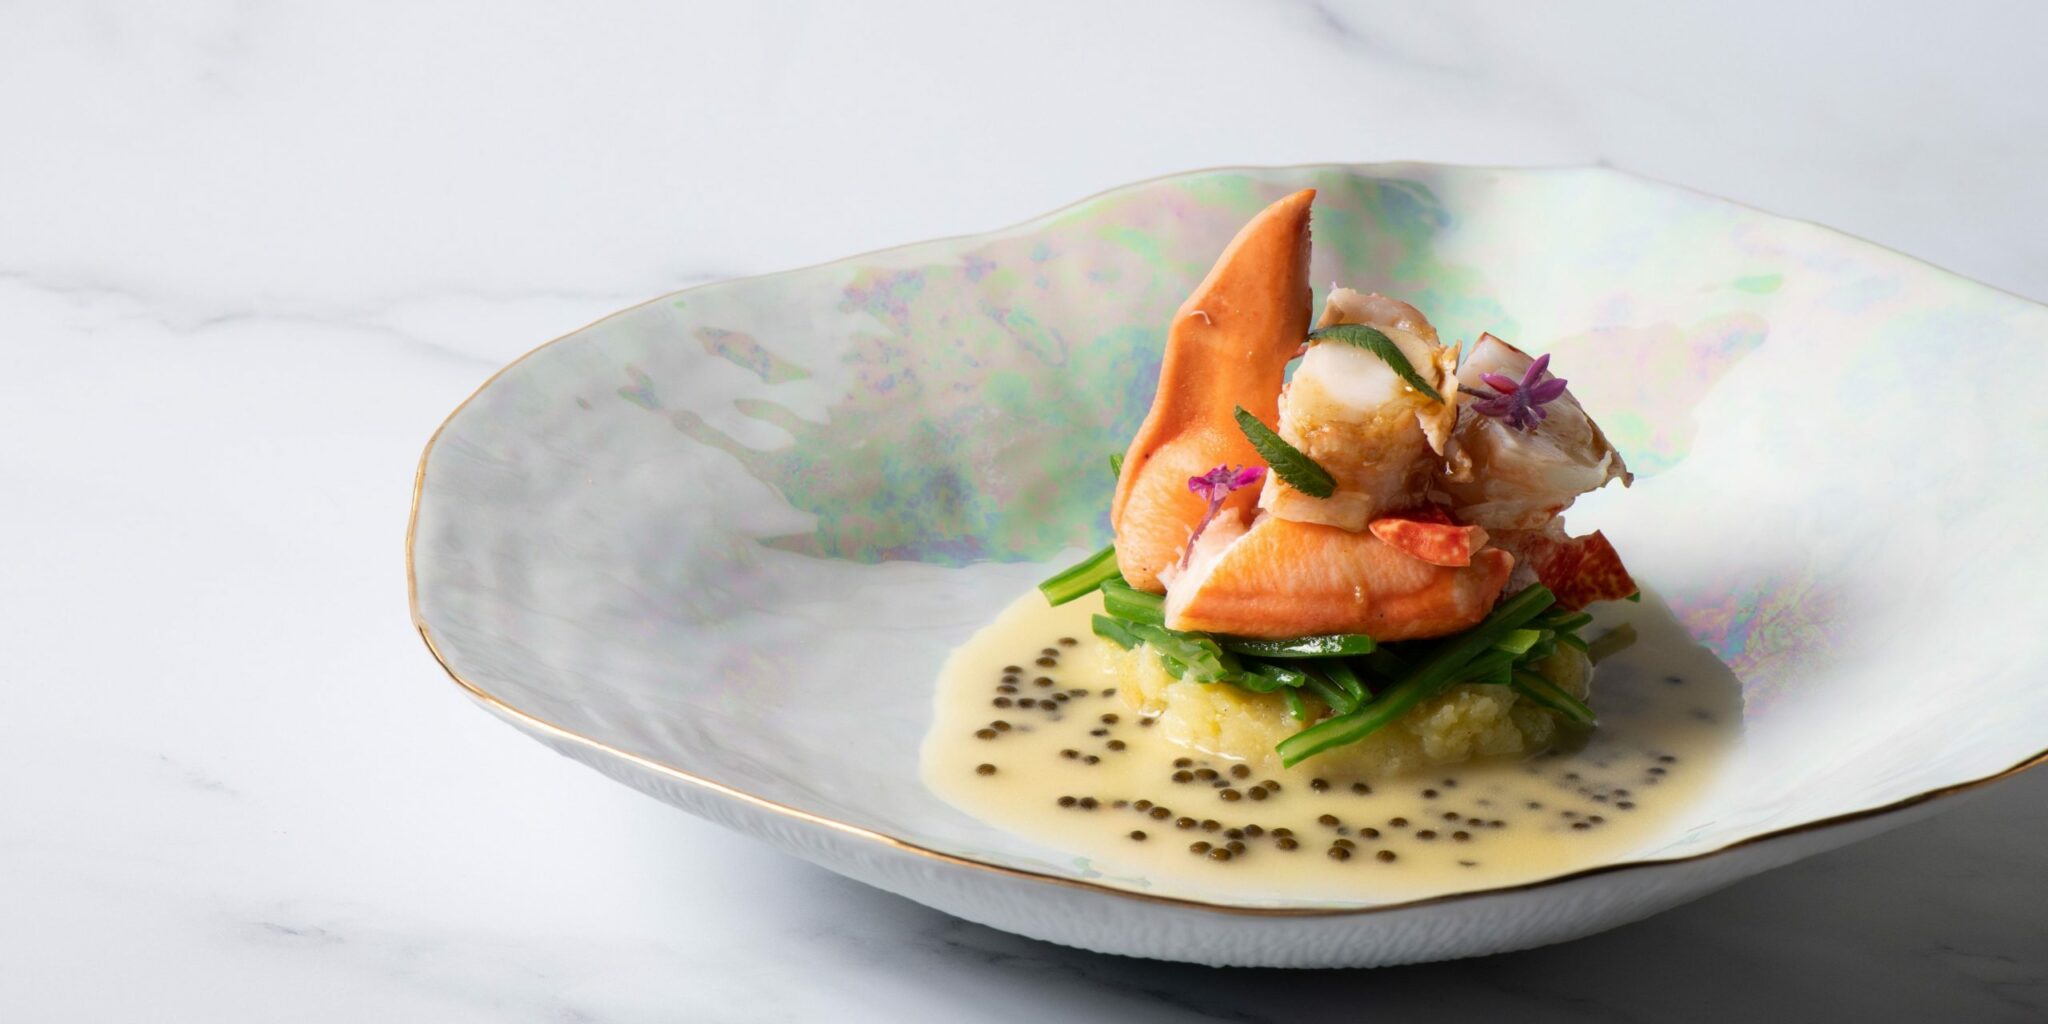 Discover Michelin Starred Restaurants in Spain: Basque Country, Cataluña & Madrid